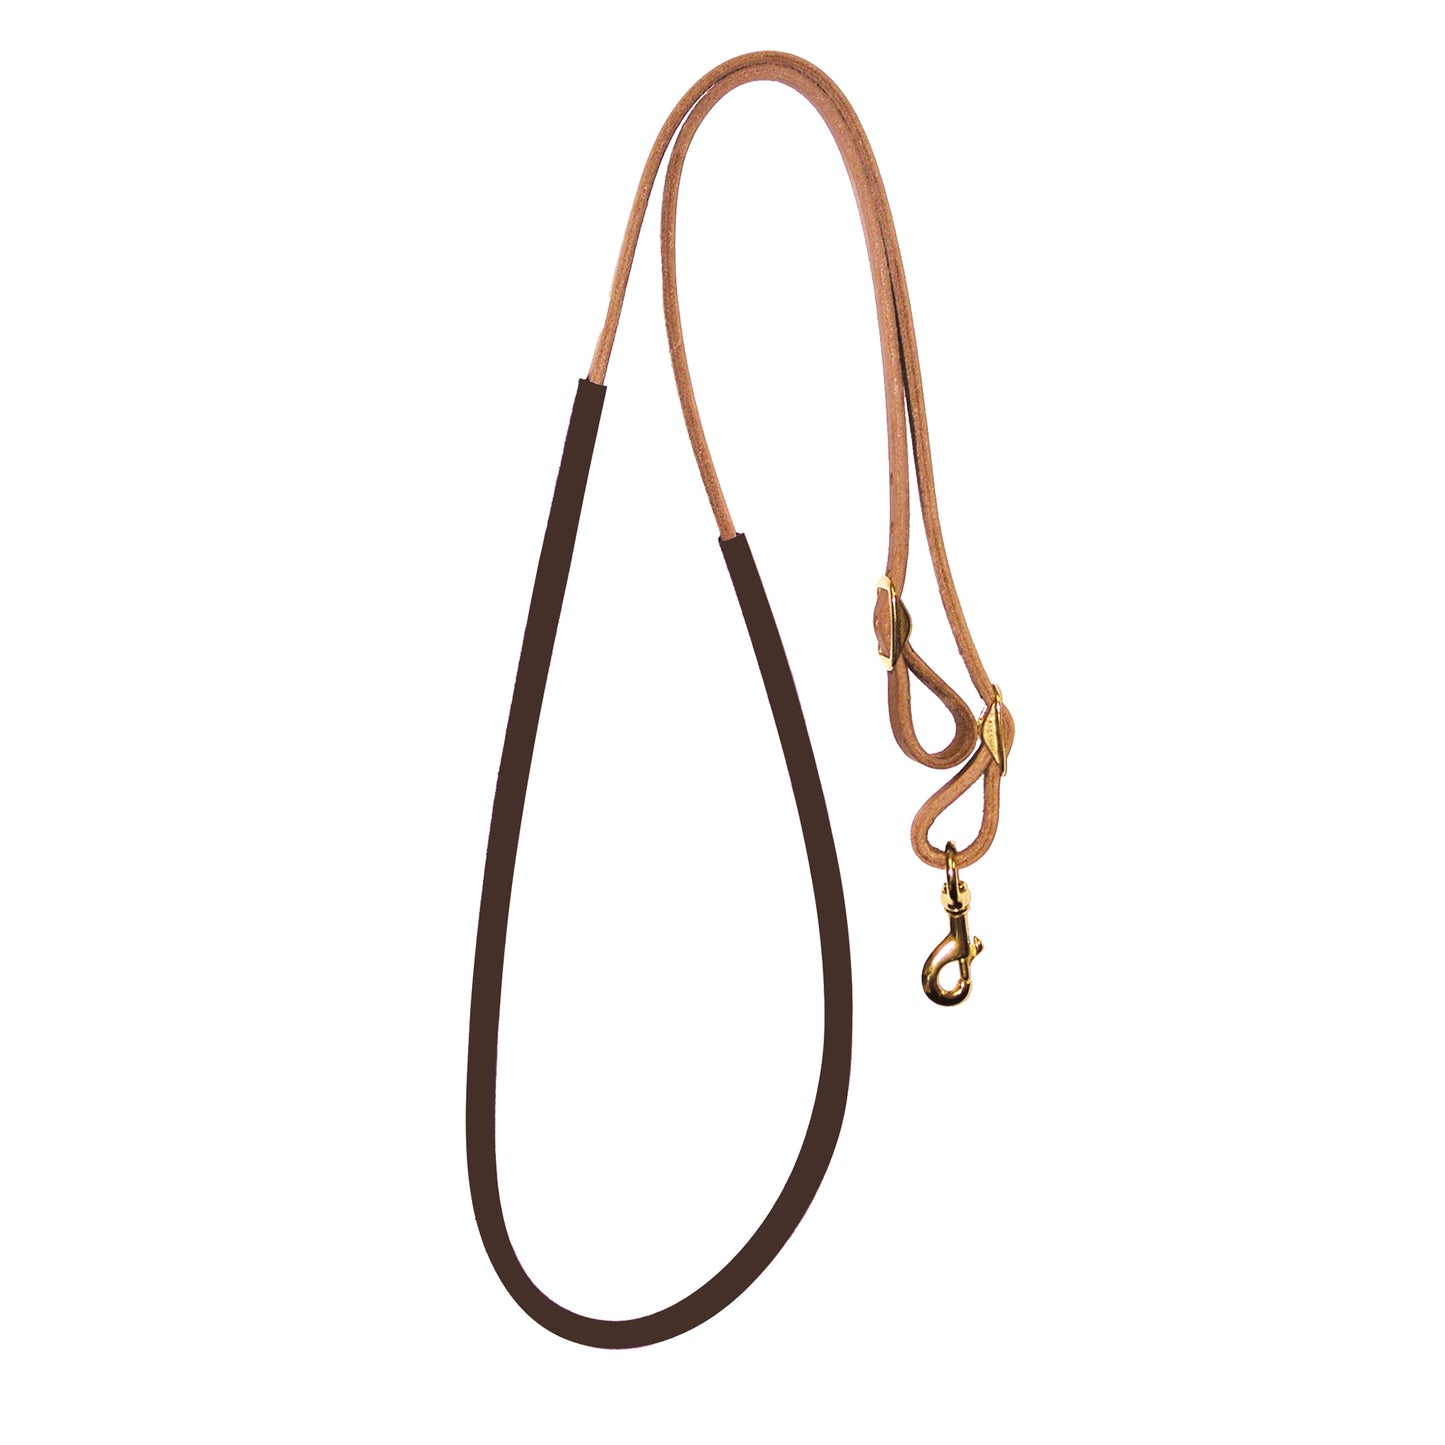 Suede Wrapped Barrel Reins